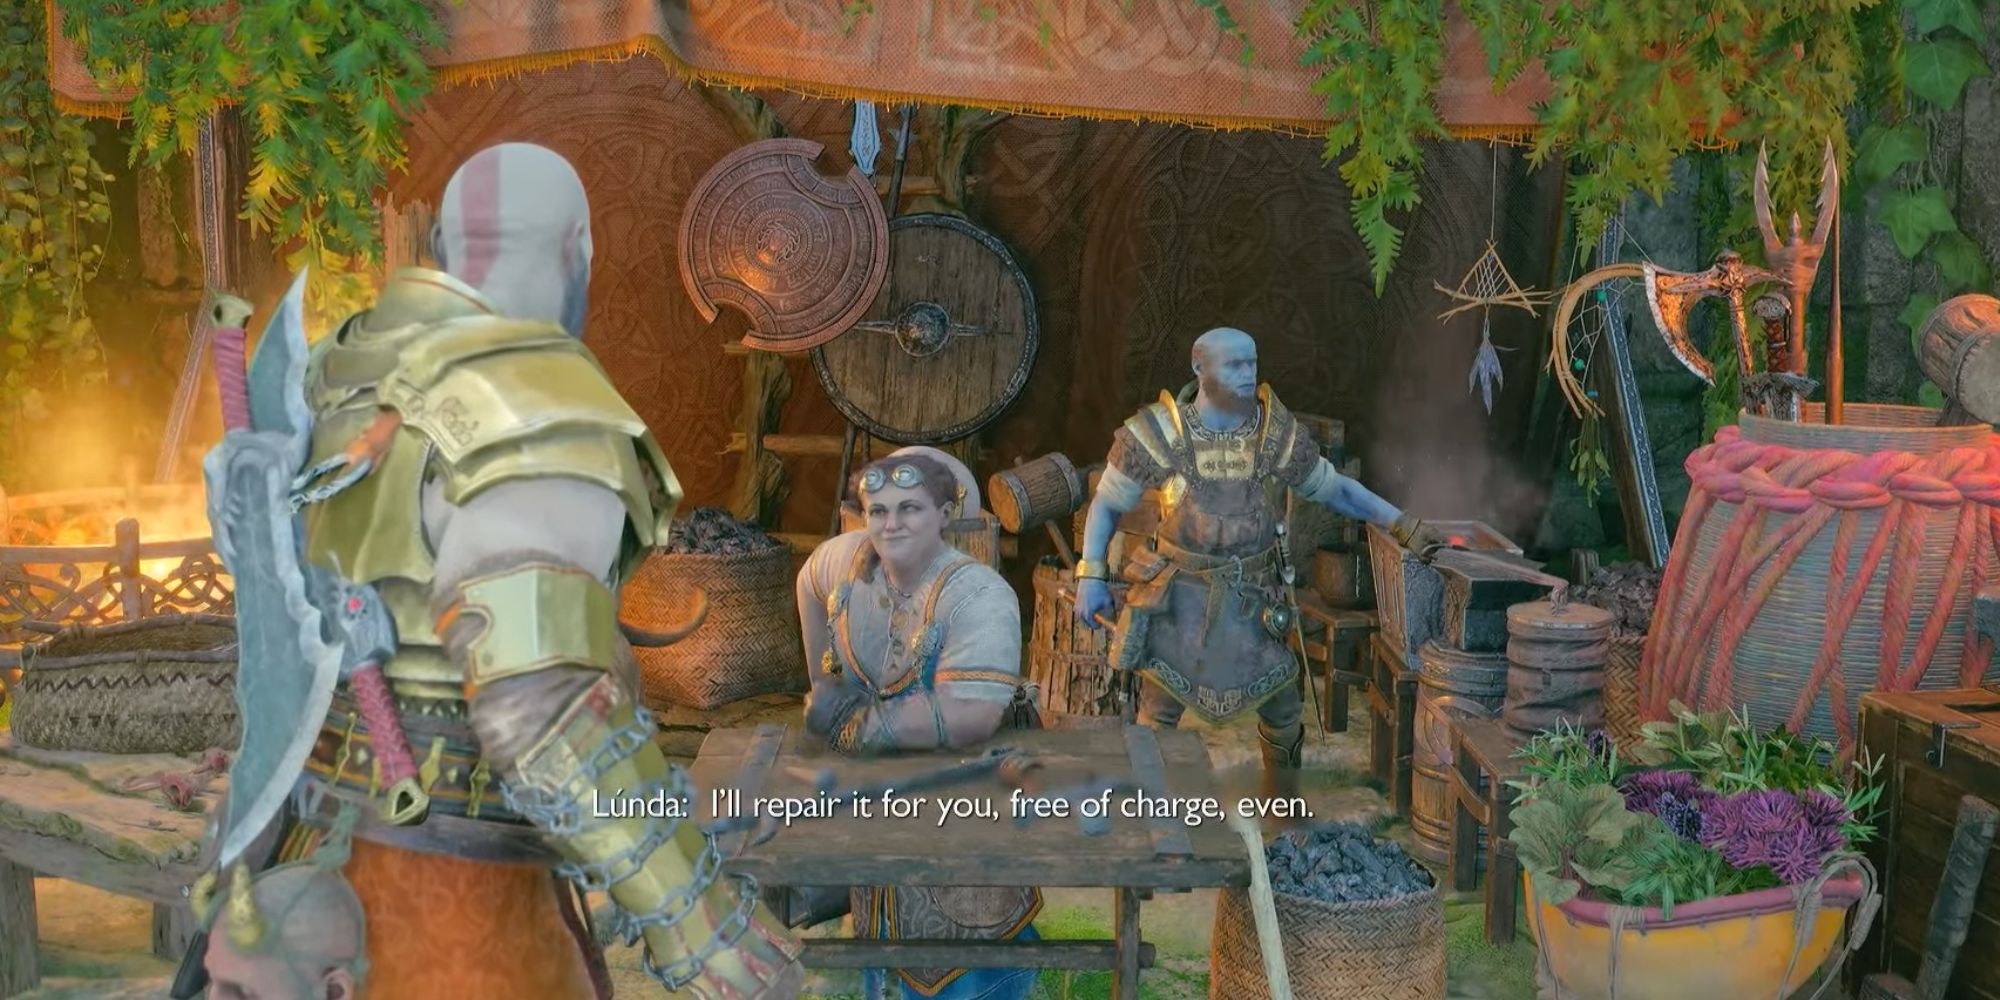 Kratos talking to Lunda about the armor she has asked him to find. Brok stands behind her working on armor.